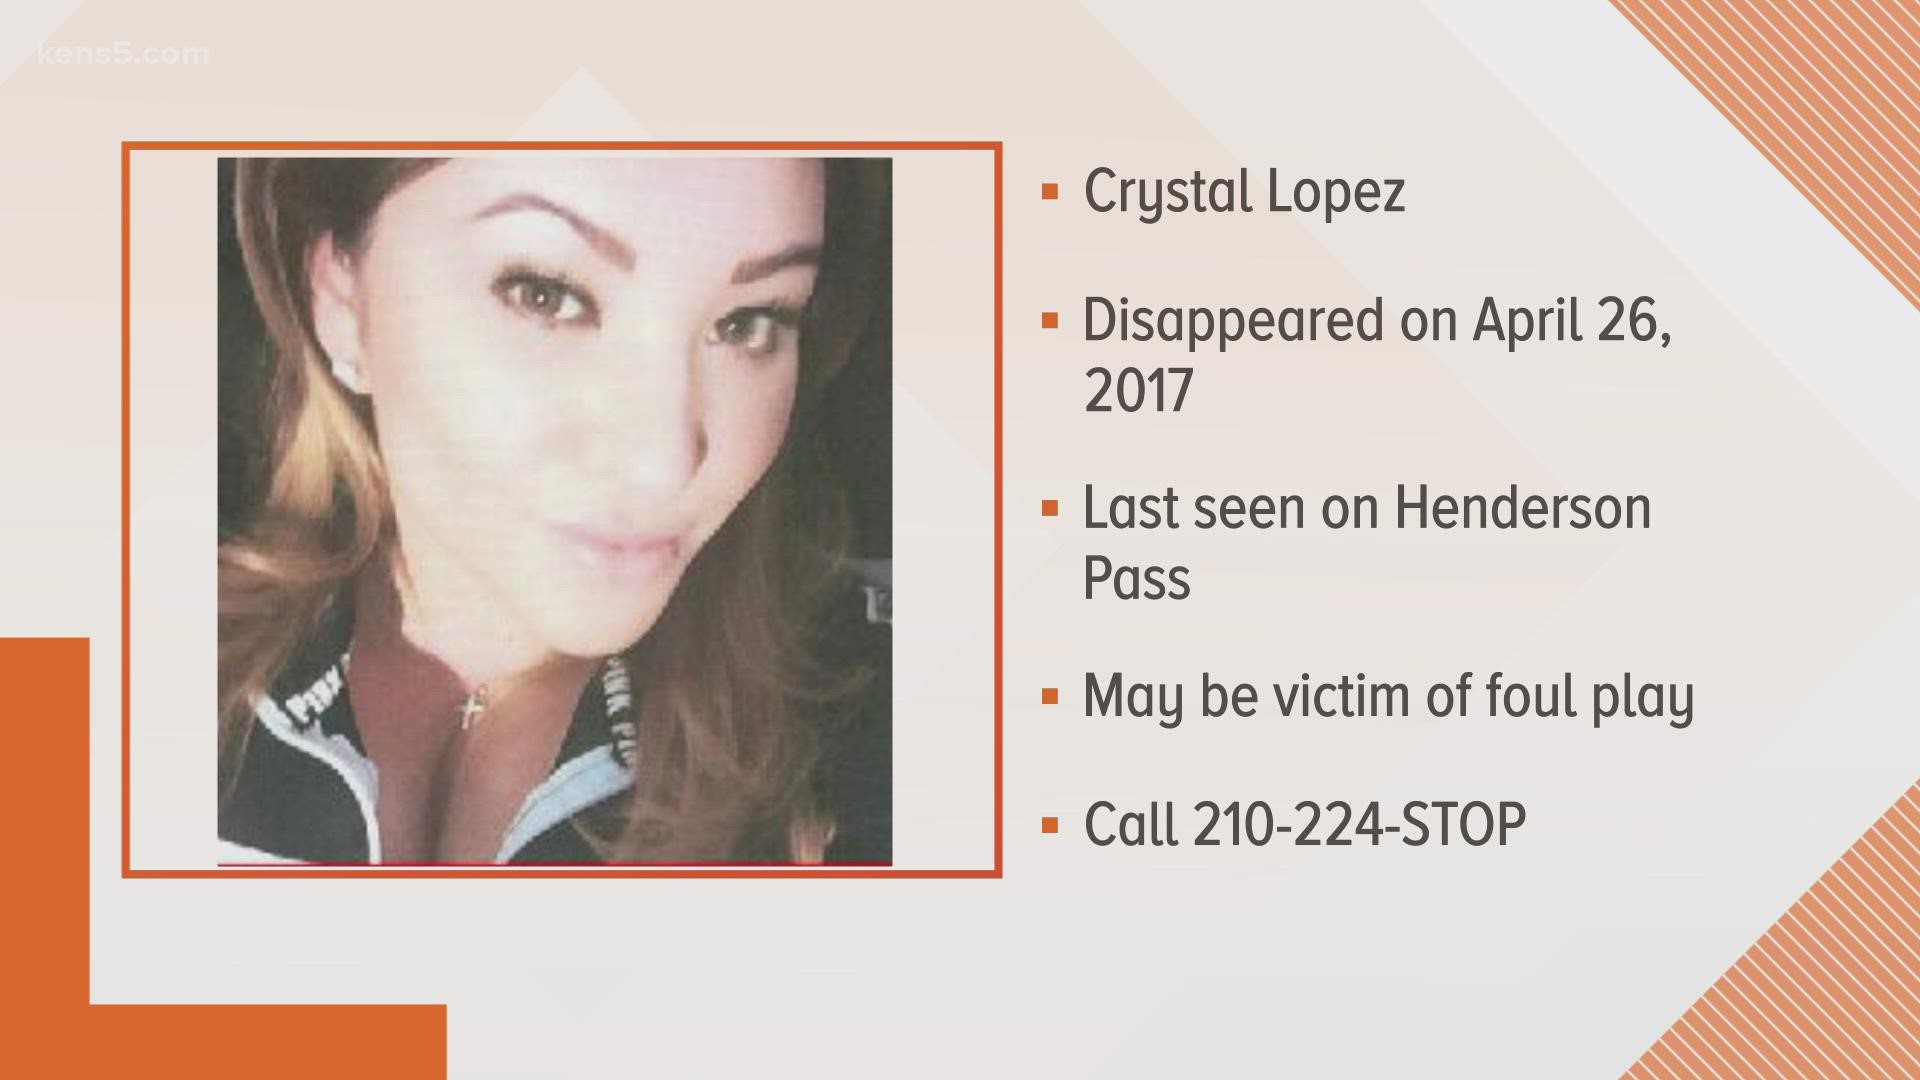 Her car was found at her apartment complex but no one's heard from her since.